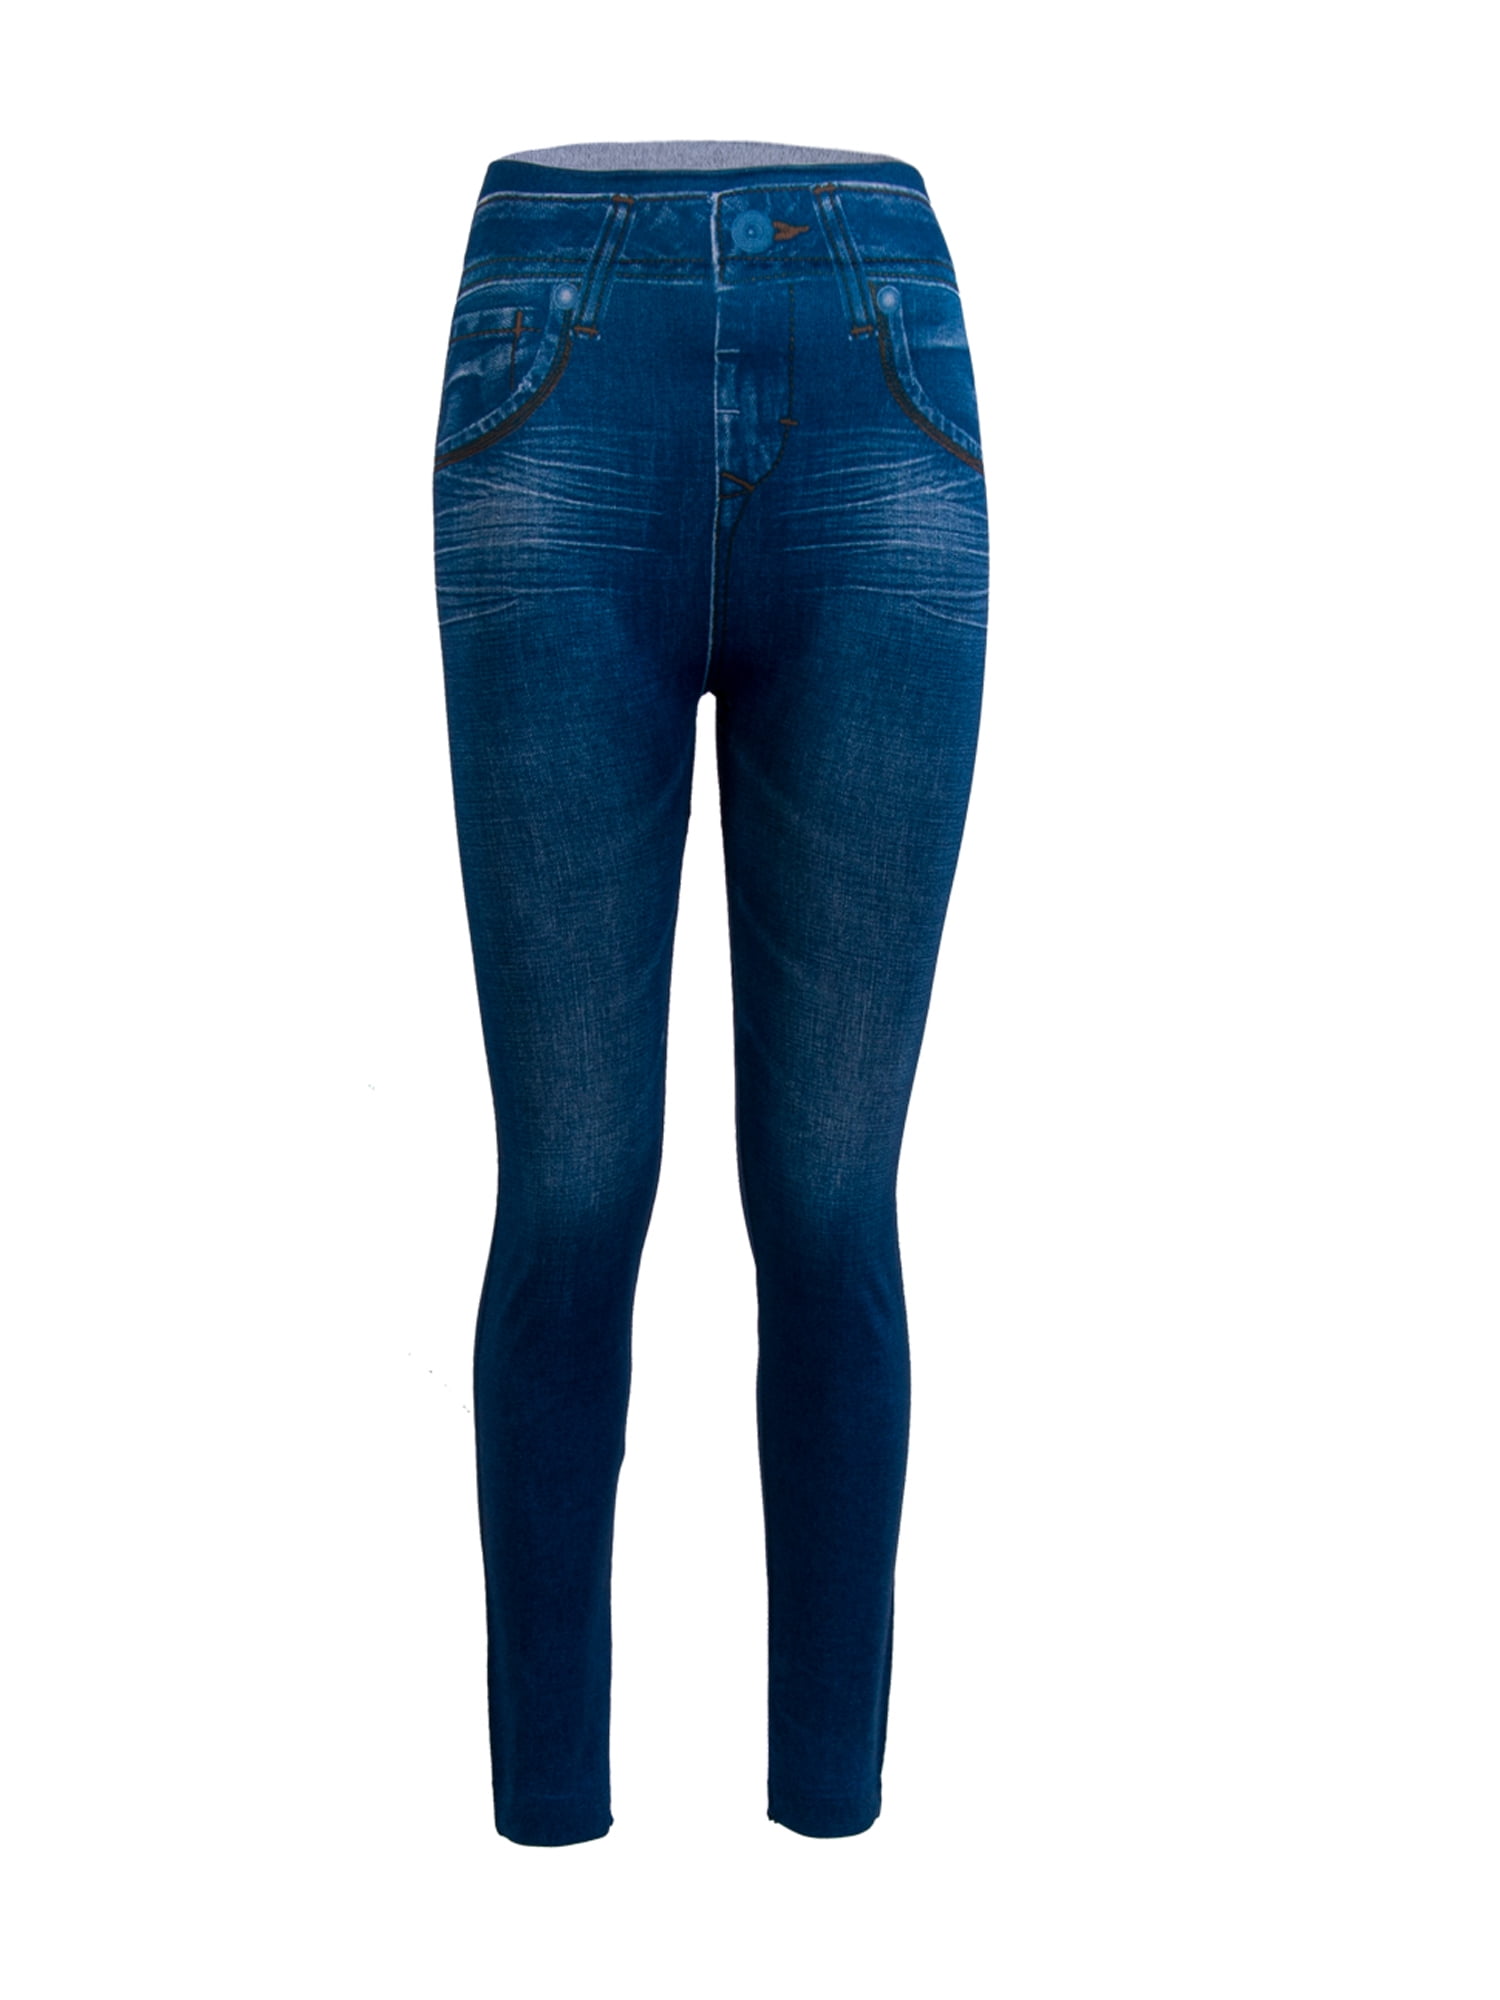 Women's Skinny Jeans with lace insert decoration Blue Faded UK 6 8 10 12 14 